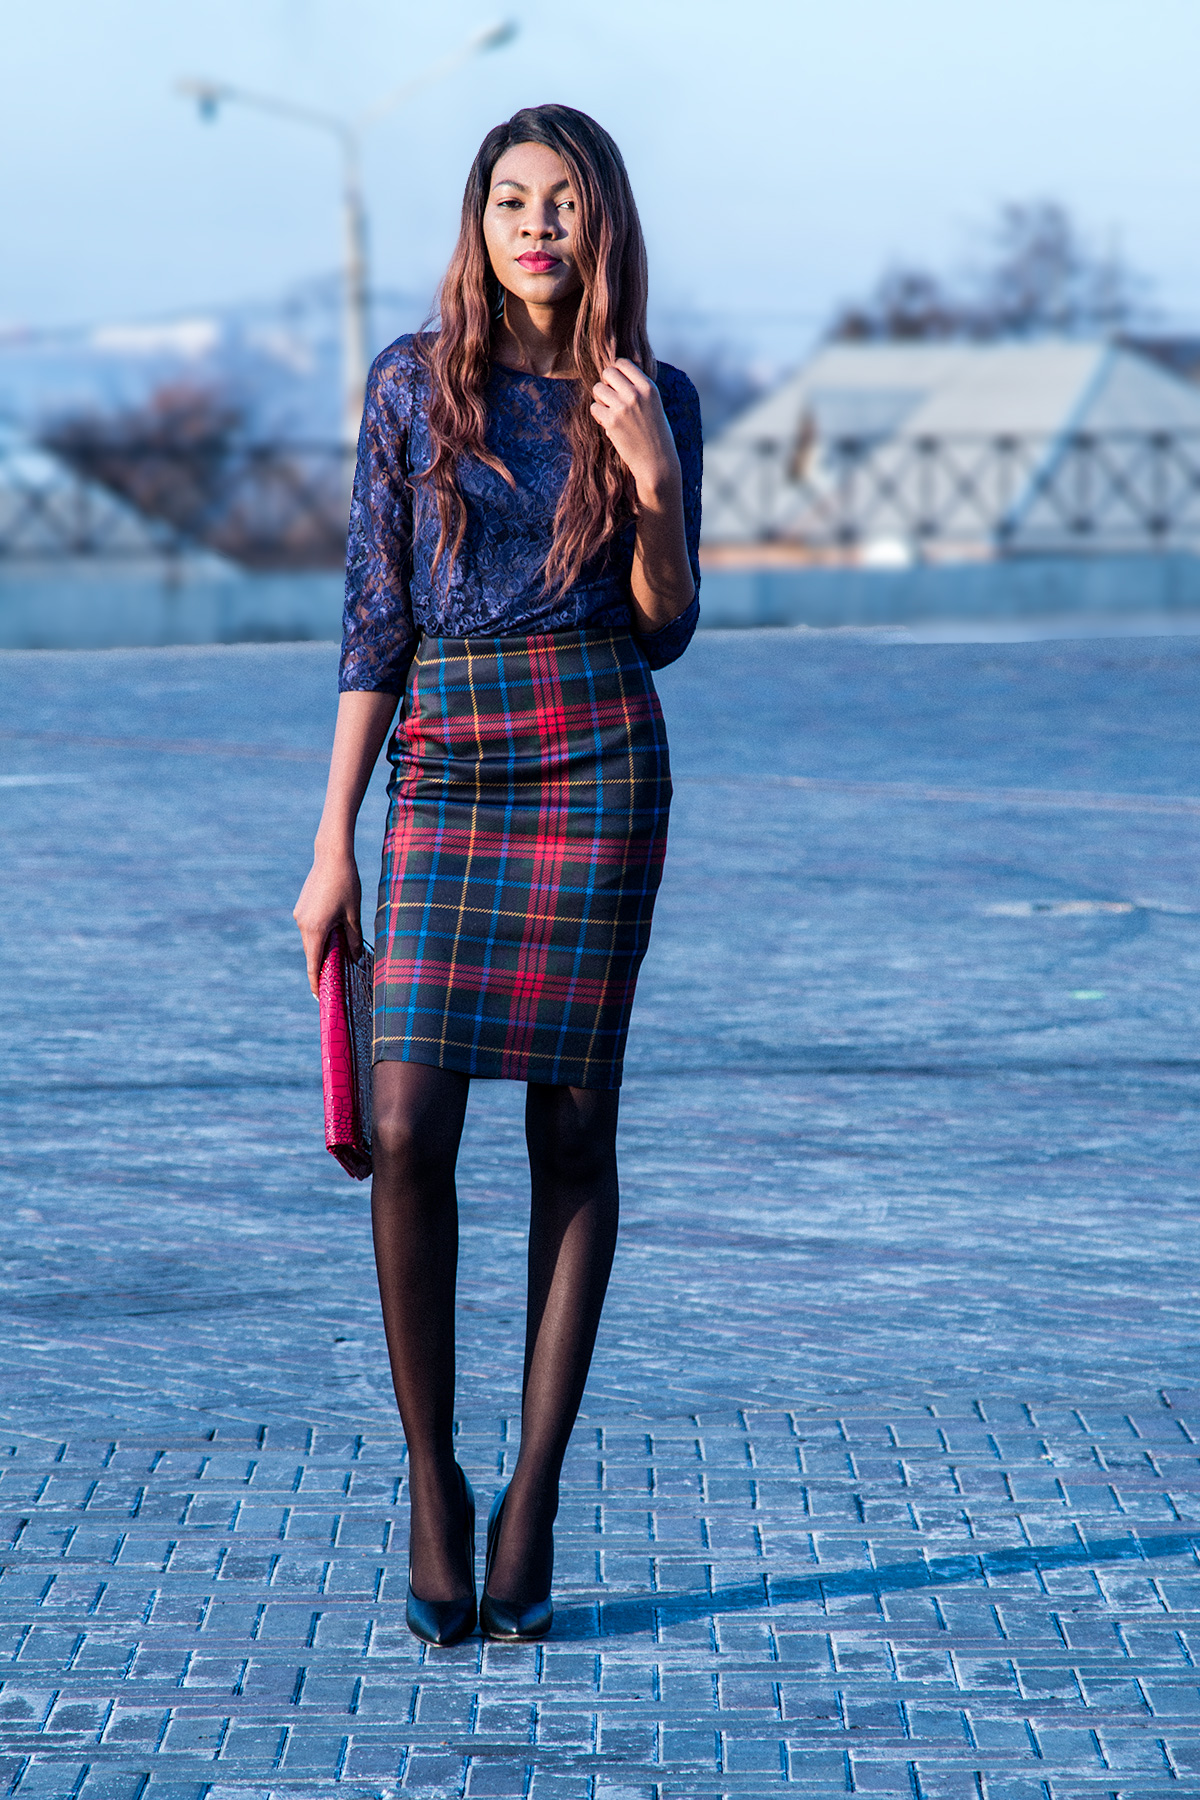 Women Long Sleeve Slim Fit Elegant Lace Cocktail Dress styled with a plaid skirt.